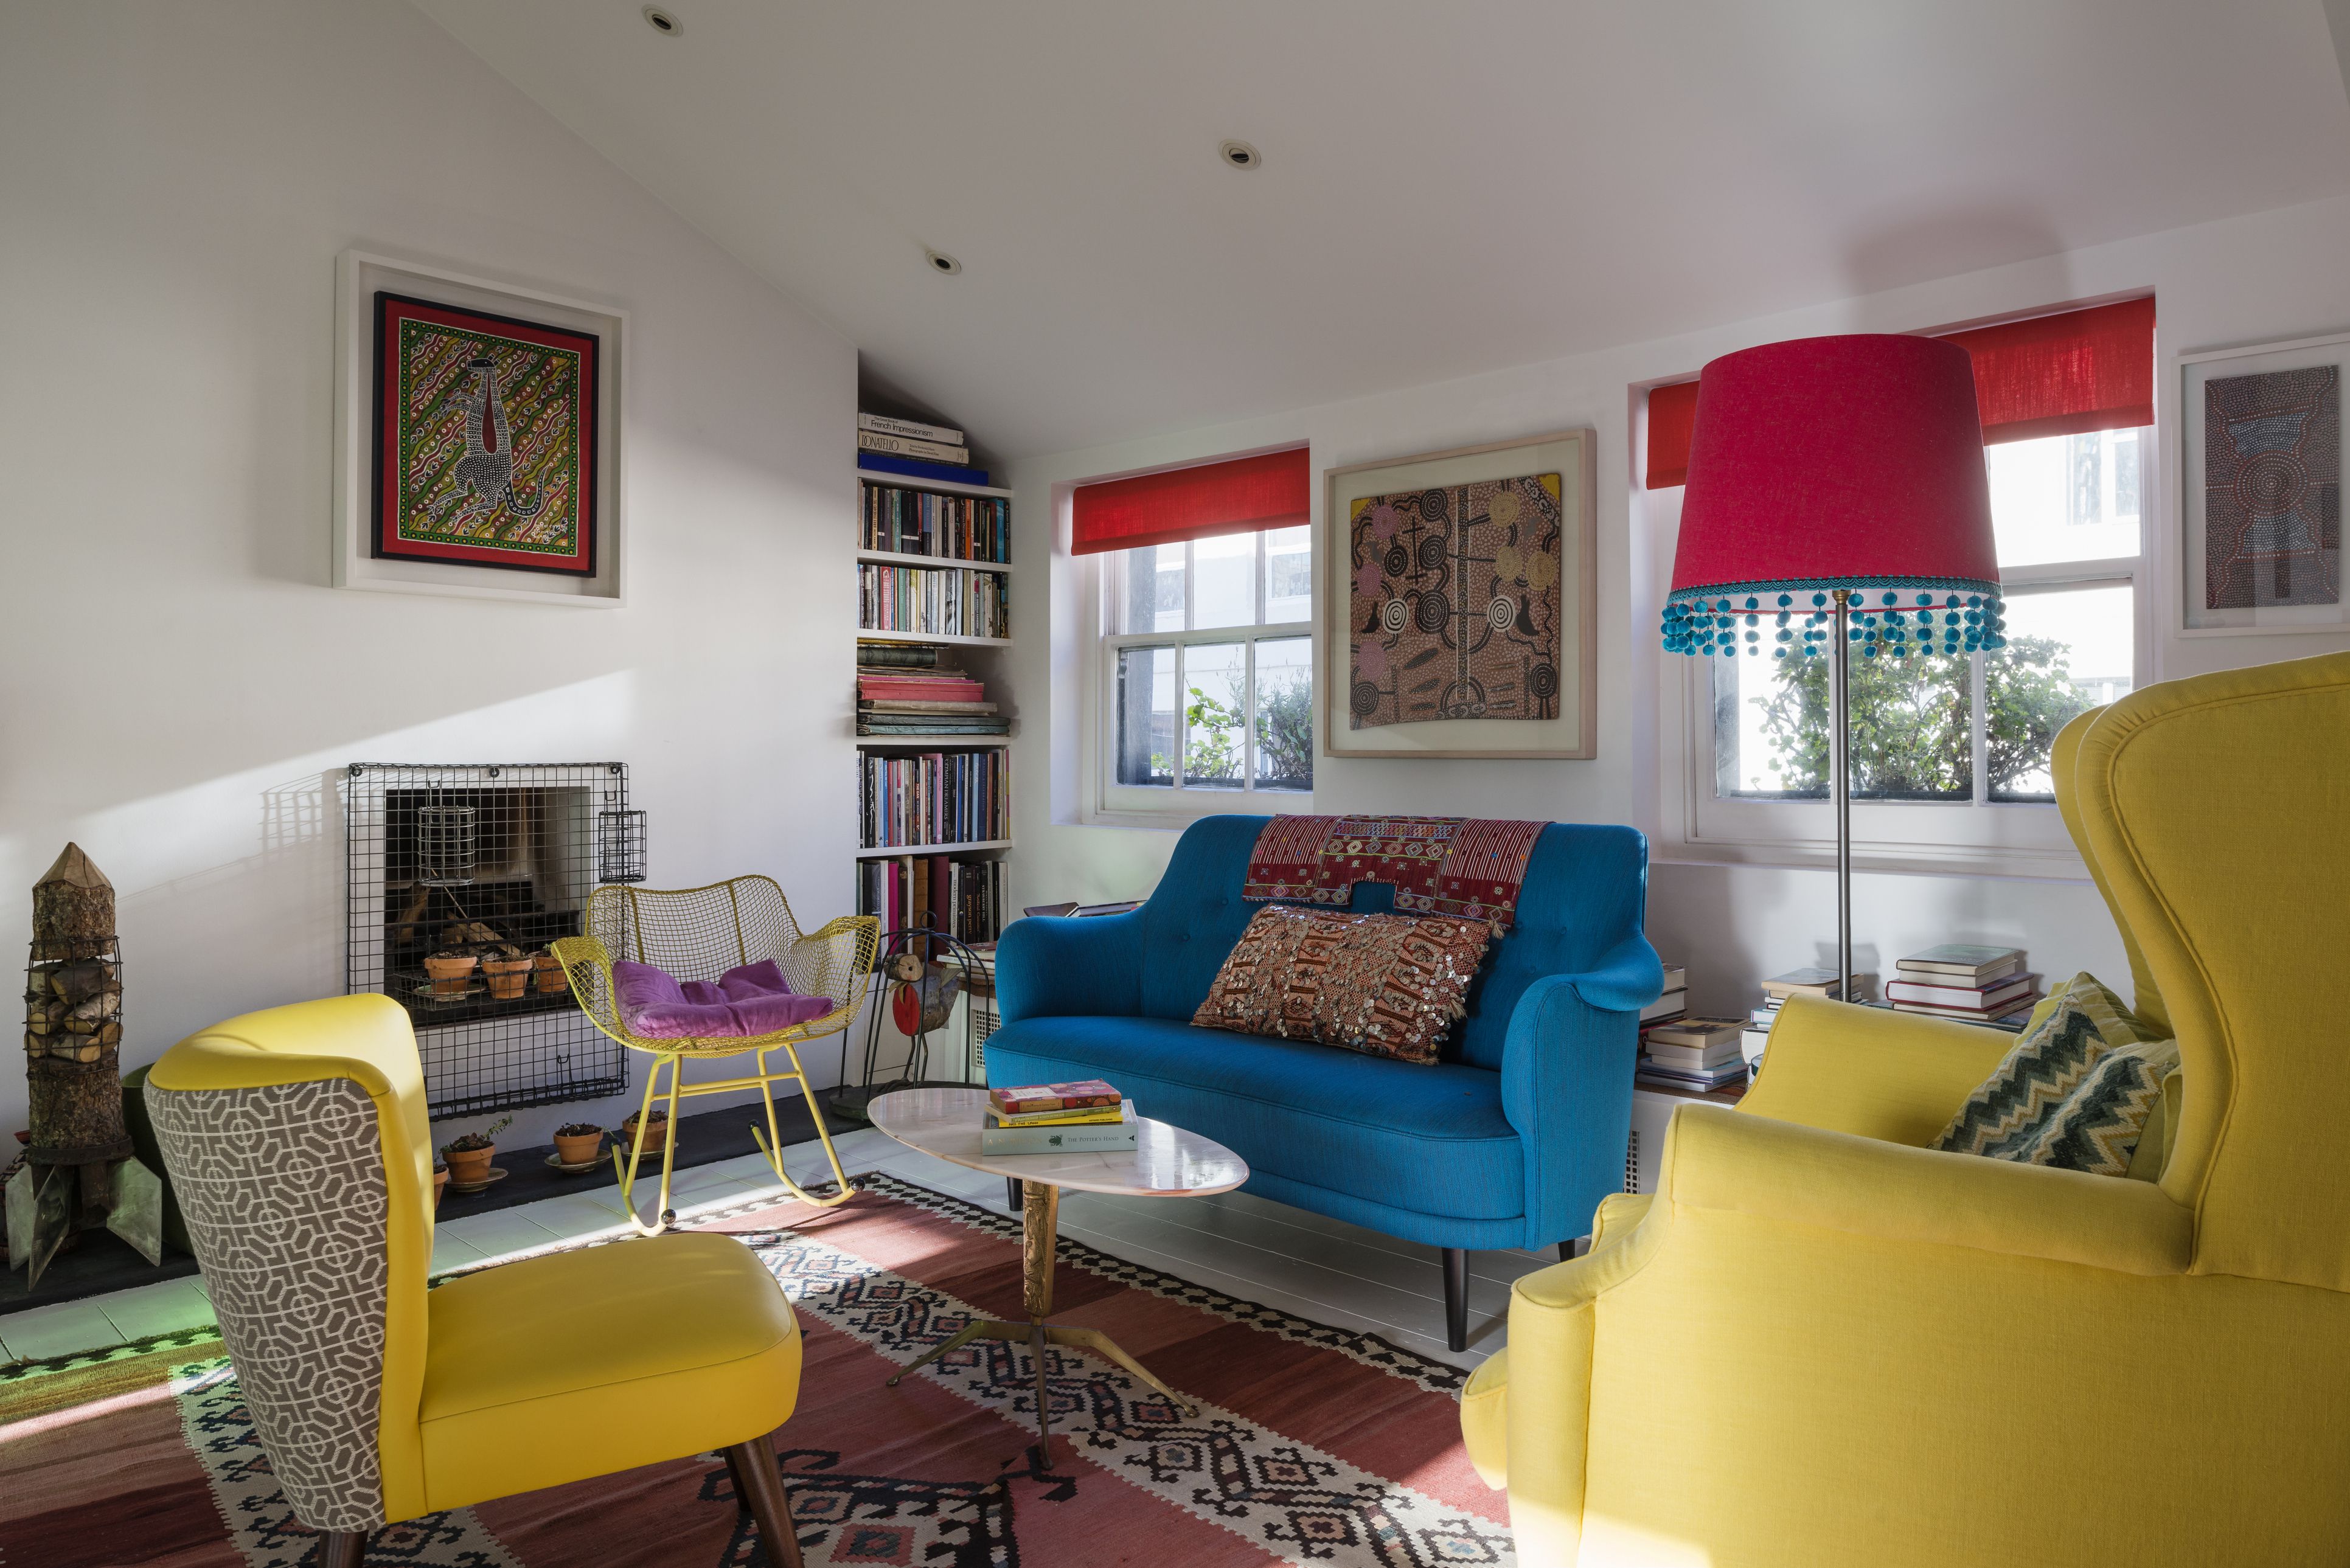 Learn More About Using Primary  Colors  in Interior Design 